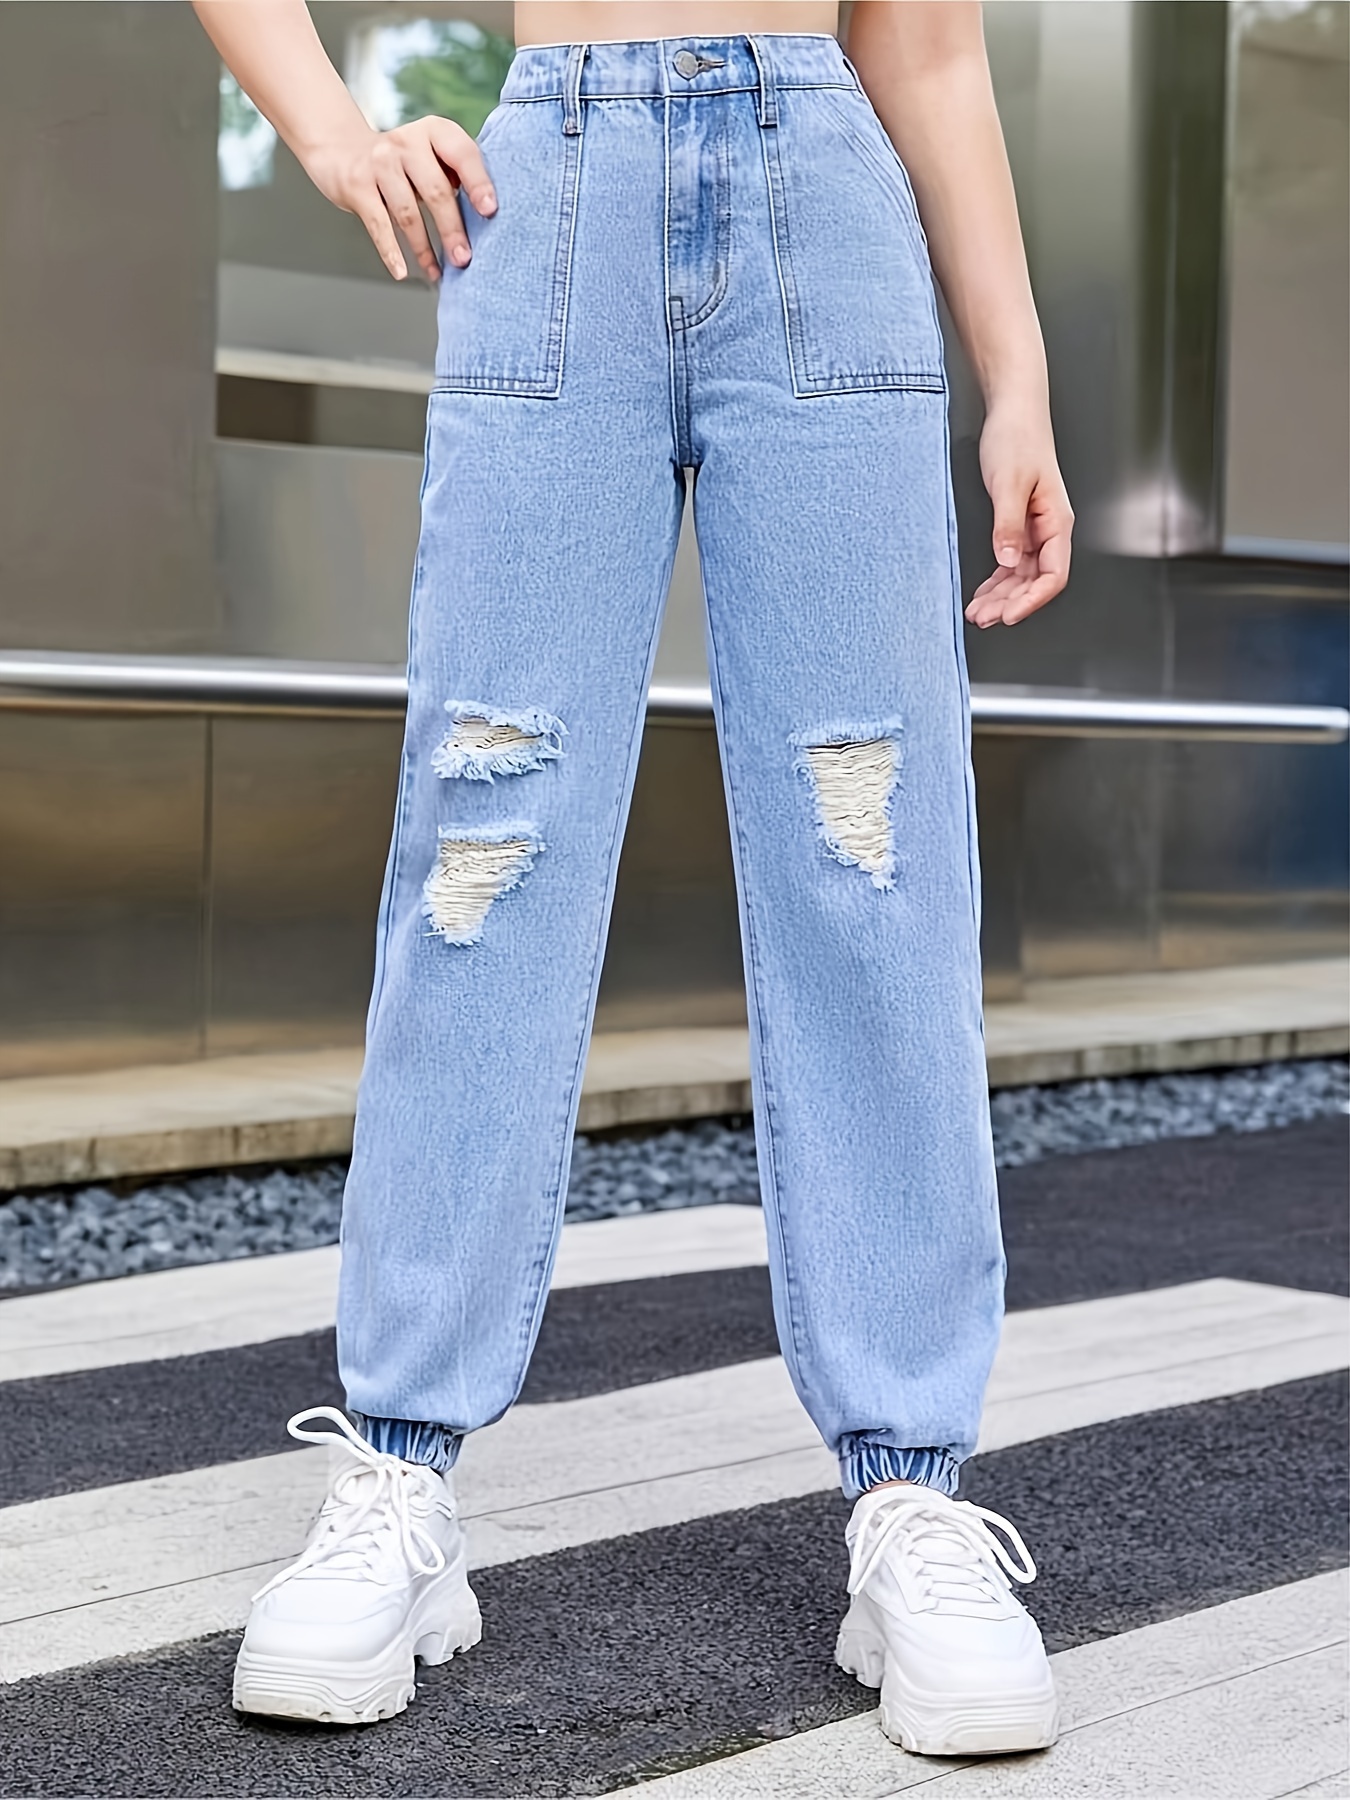 Everyday Girls Casual Ripped Jogger Jeans Elastic Waist Casual Denim Pants